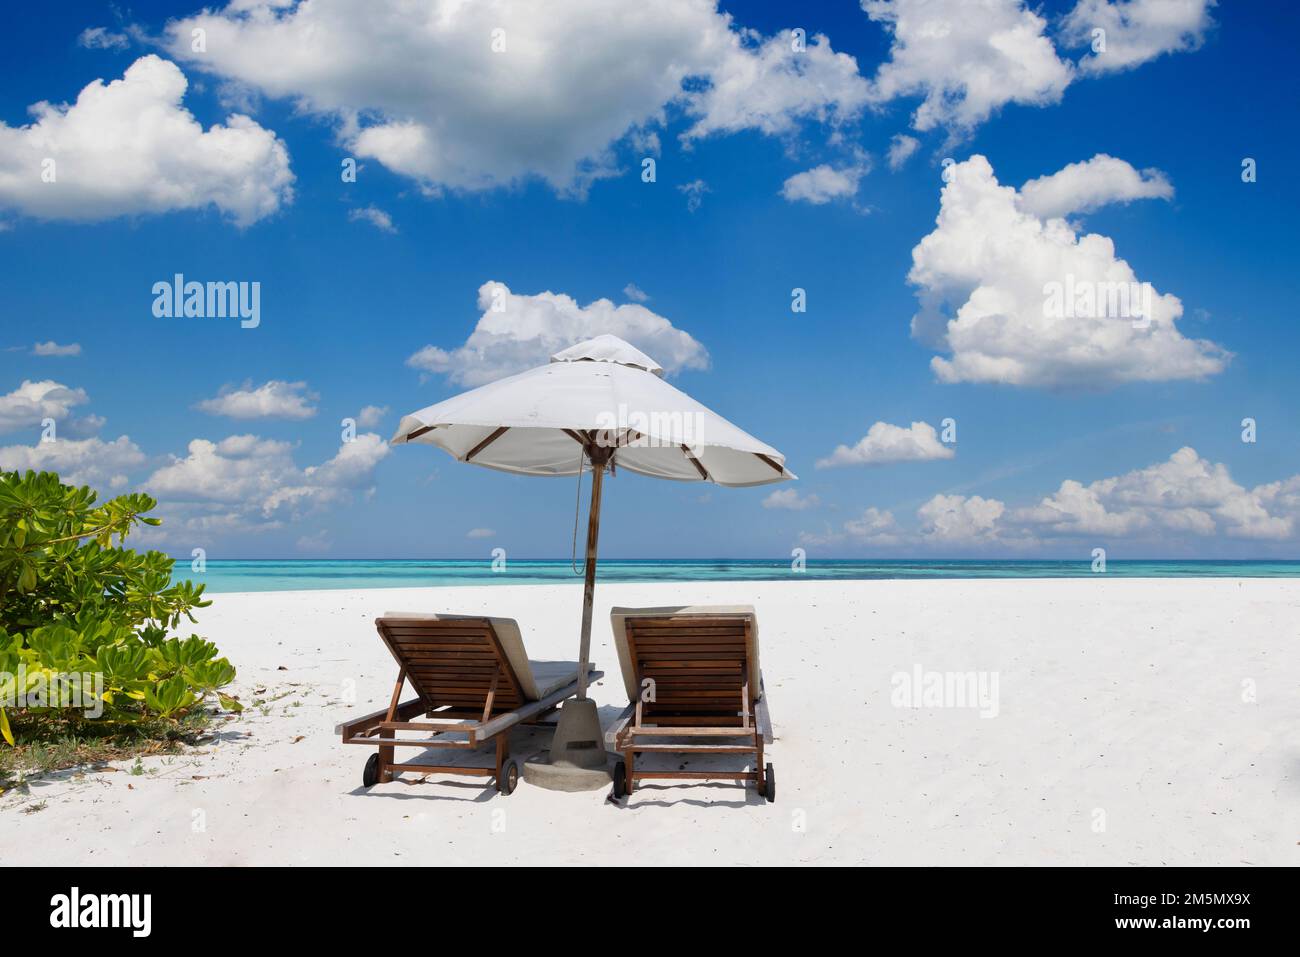 Amazing vacation panorama on summer island beach. Two chairs with palm leaves and umbrella, close seaside, horizon. Exotic landscape tropical paradise Stock Photo